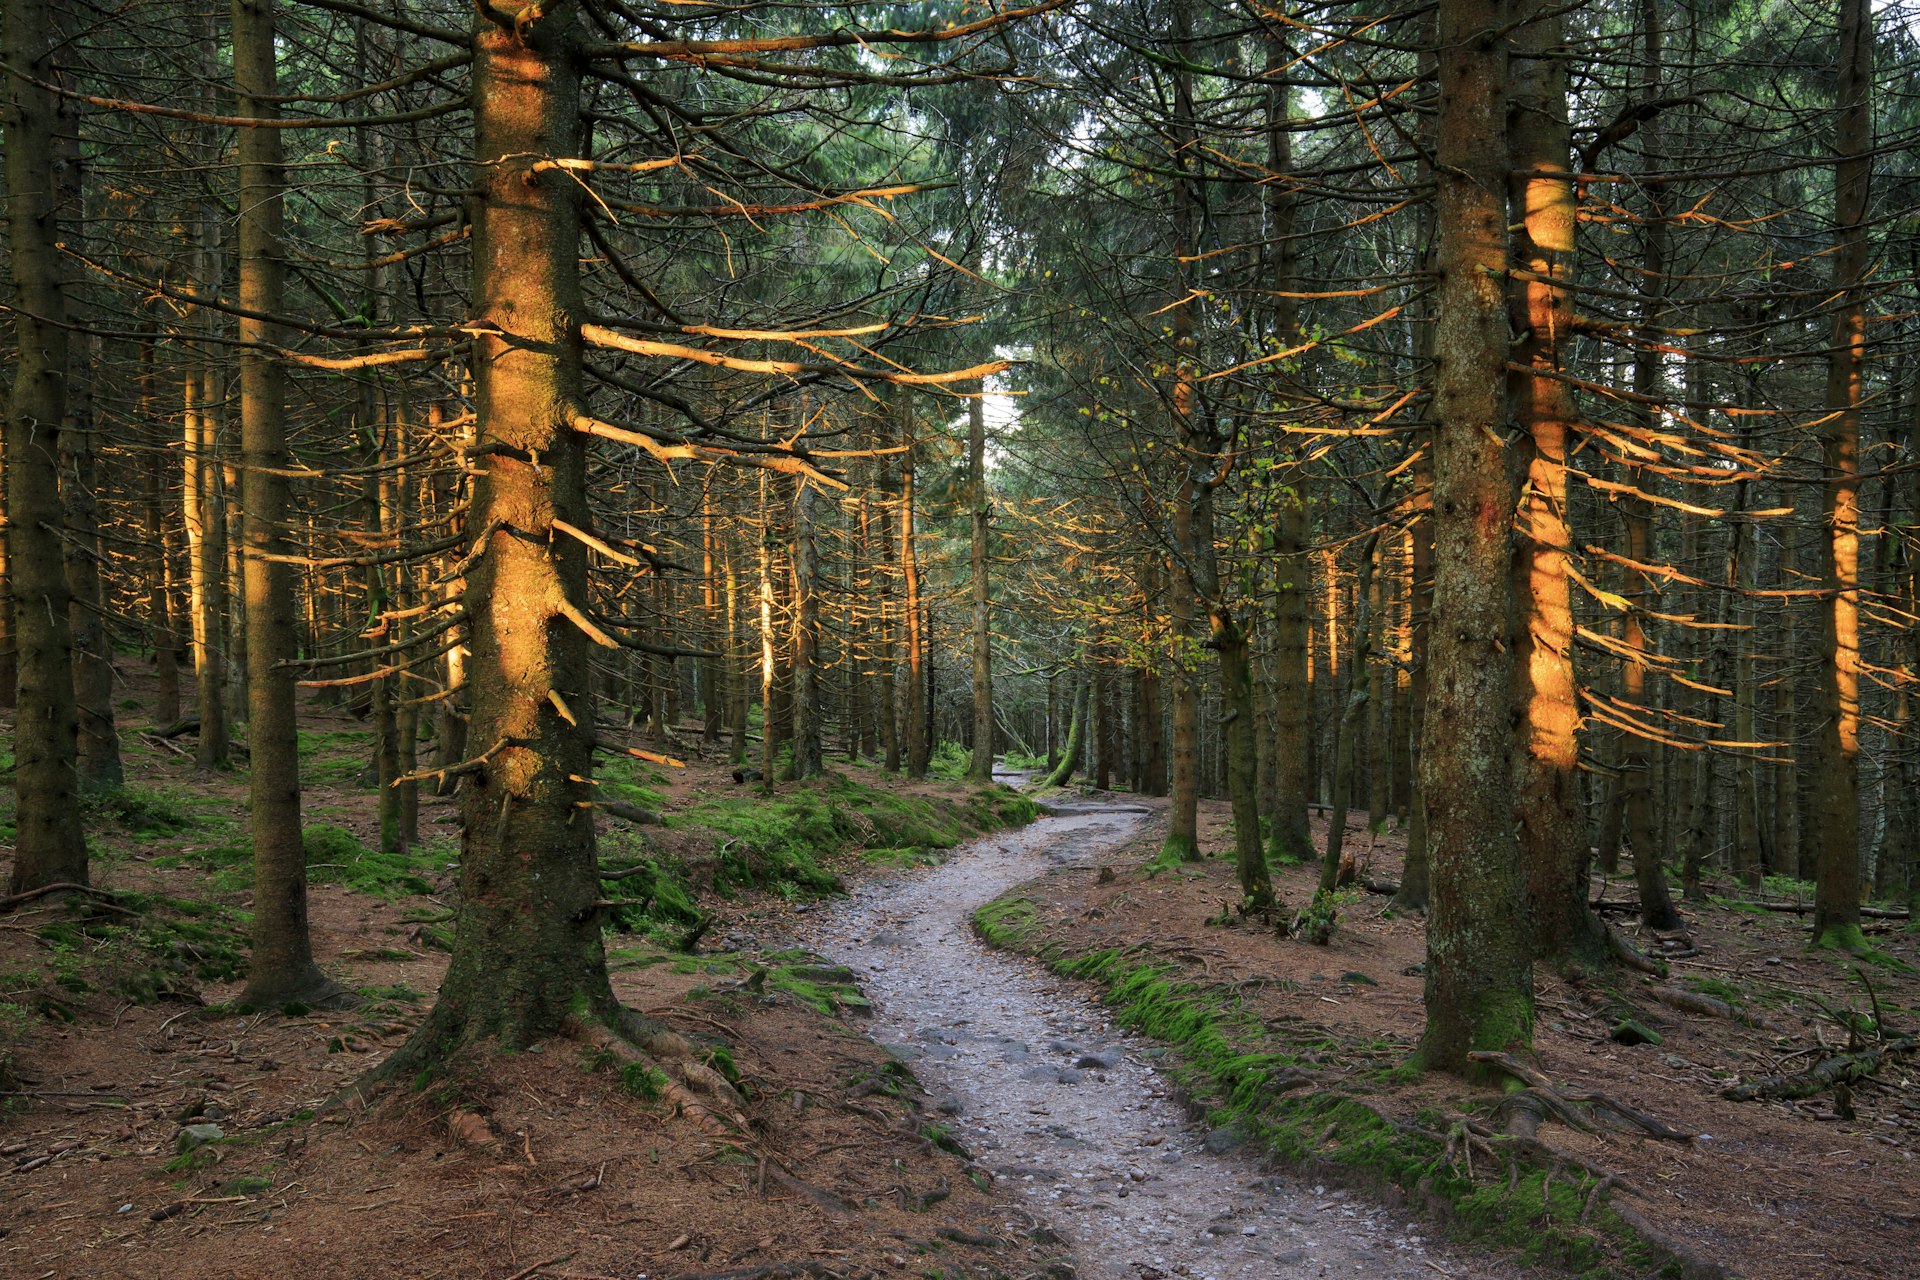 A path through trees in the Black Forest National Park, Germany